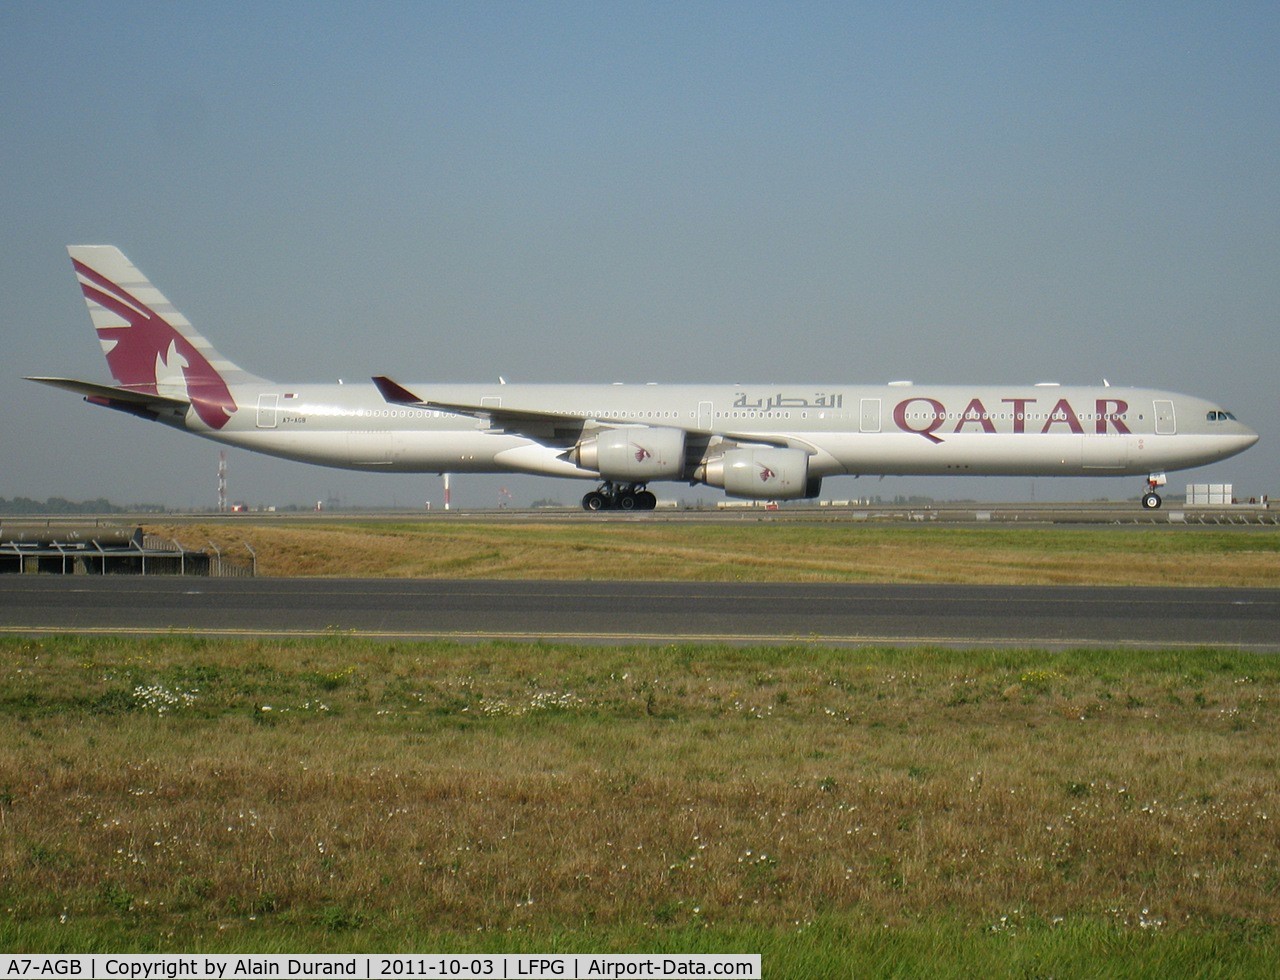 A7-AGB, 2005 Airbus A340-642X C/N 715, Landed on runway 27R and was seconds from leaving Bravo Loop